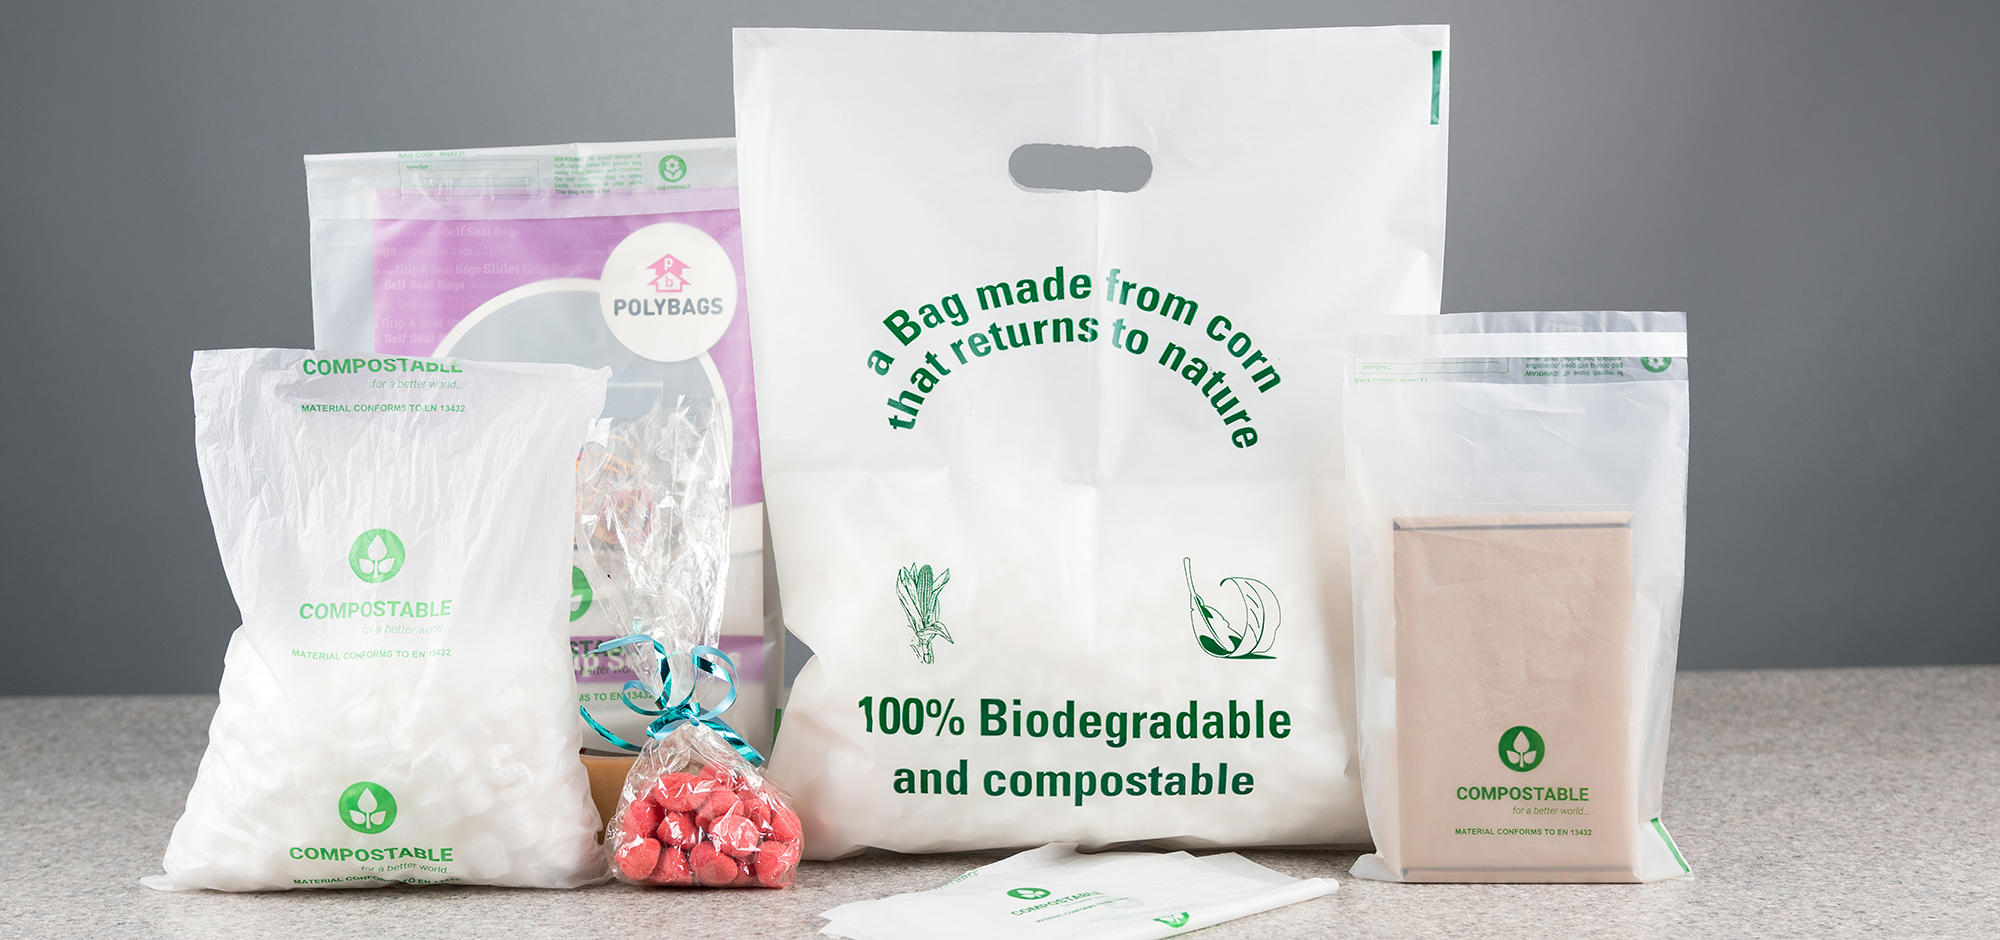 Sustainable Plastic Bag Alternatives for Your Business - ePromos Education  Center